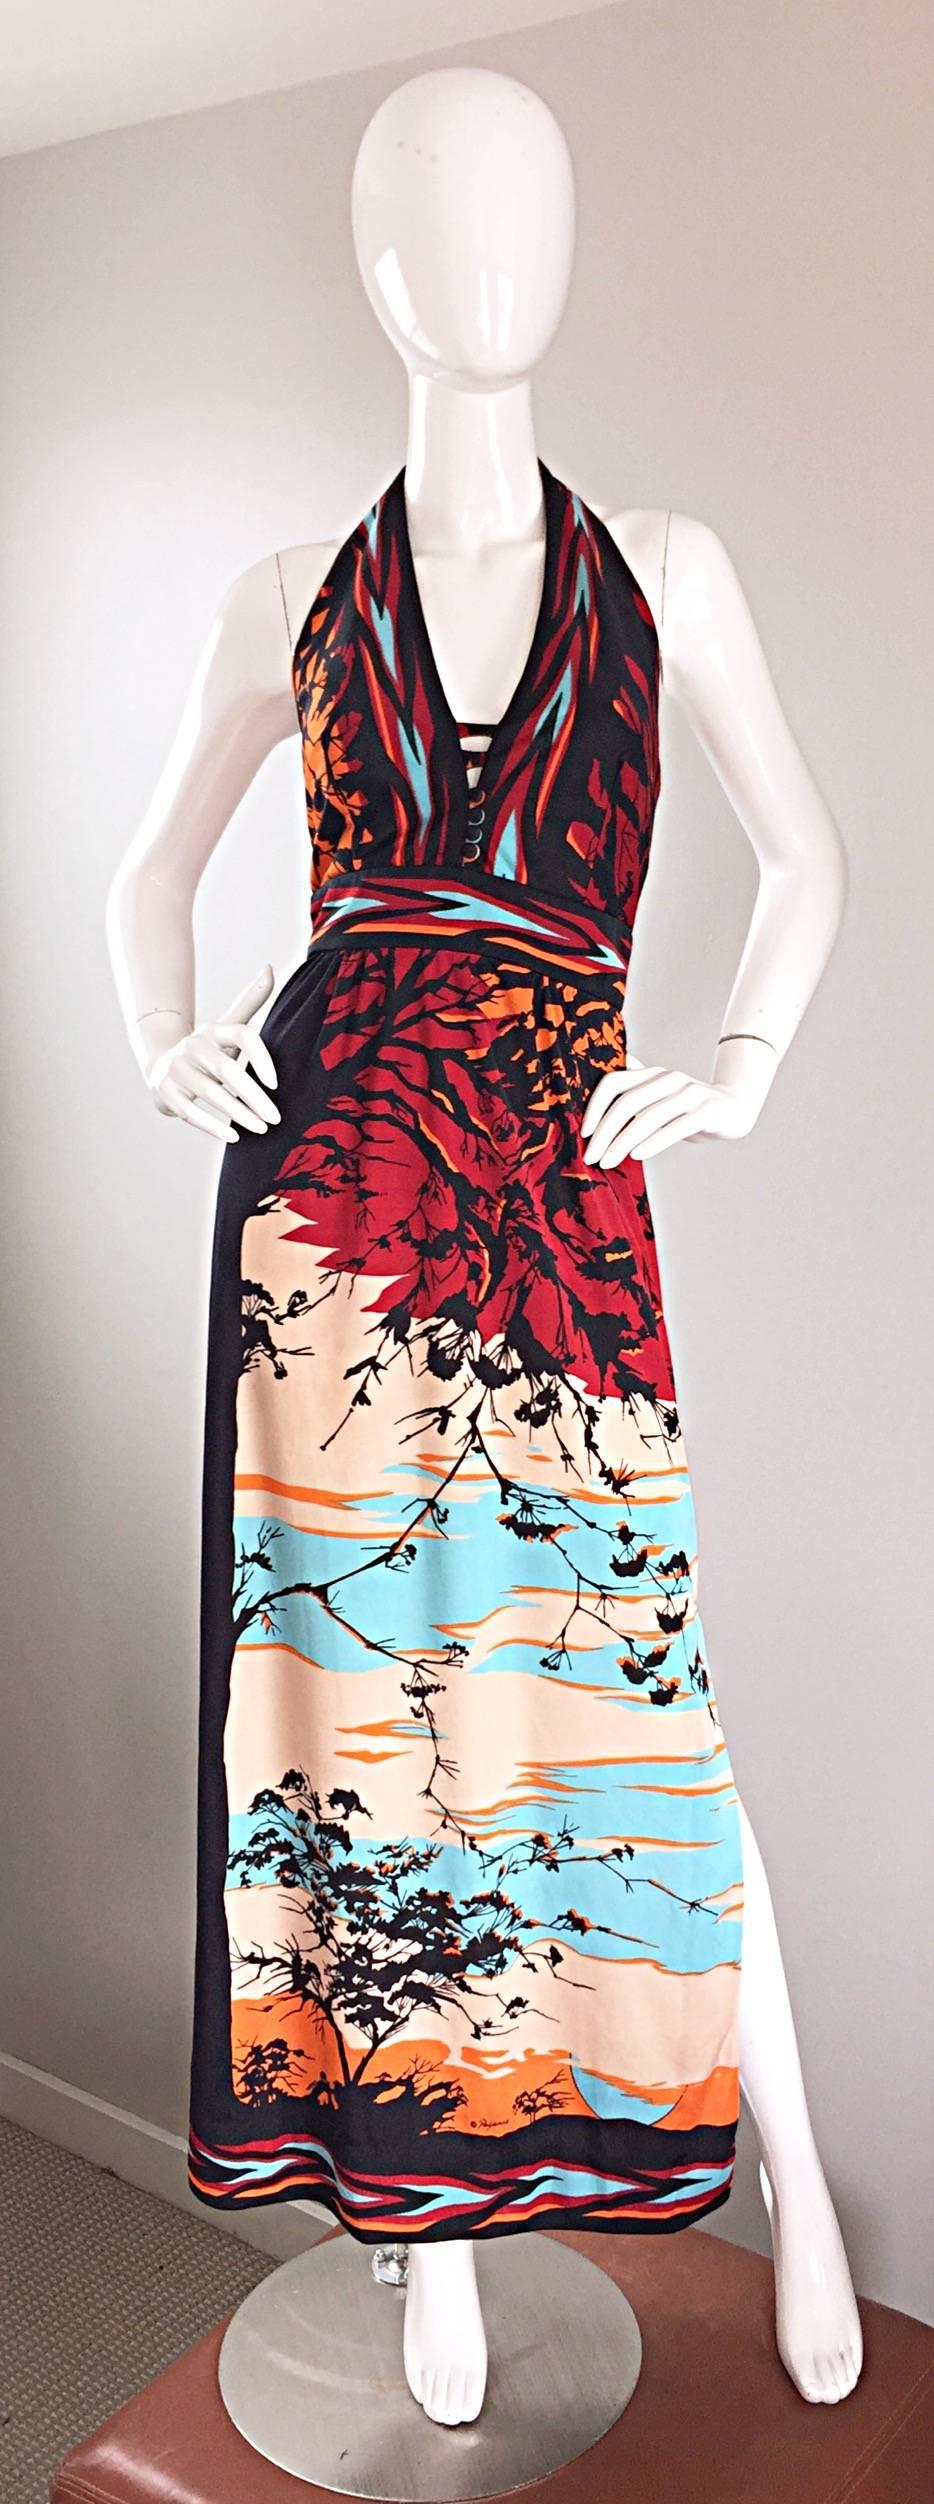 Incredible vintage 70s PAGANNE by GENE BERK Asian themed jersey maxi dress! Wonderful prints of black trees with a beautiful skyline. Cage detail above the bust add even more detail! Sexy slit up the side reveals just the right amount of skin.